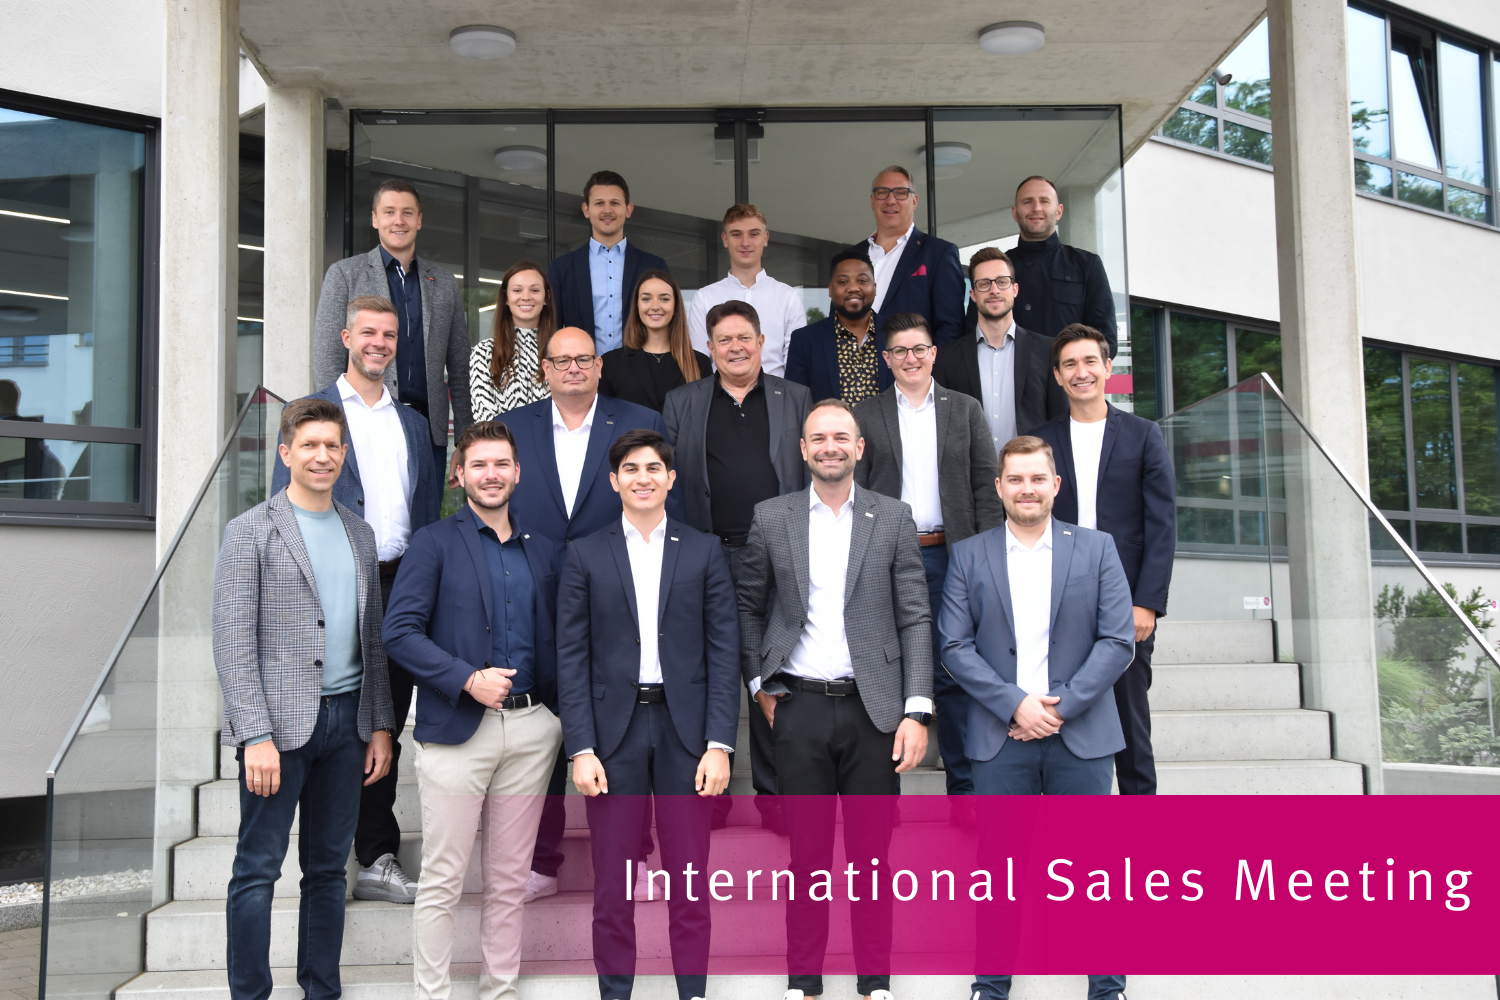 Into the future together – International Sales Meeting